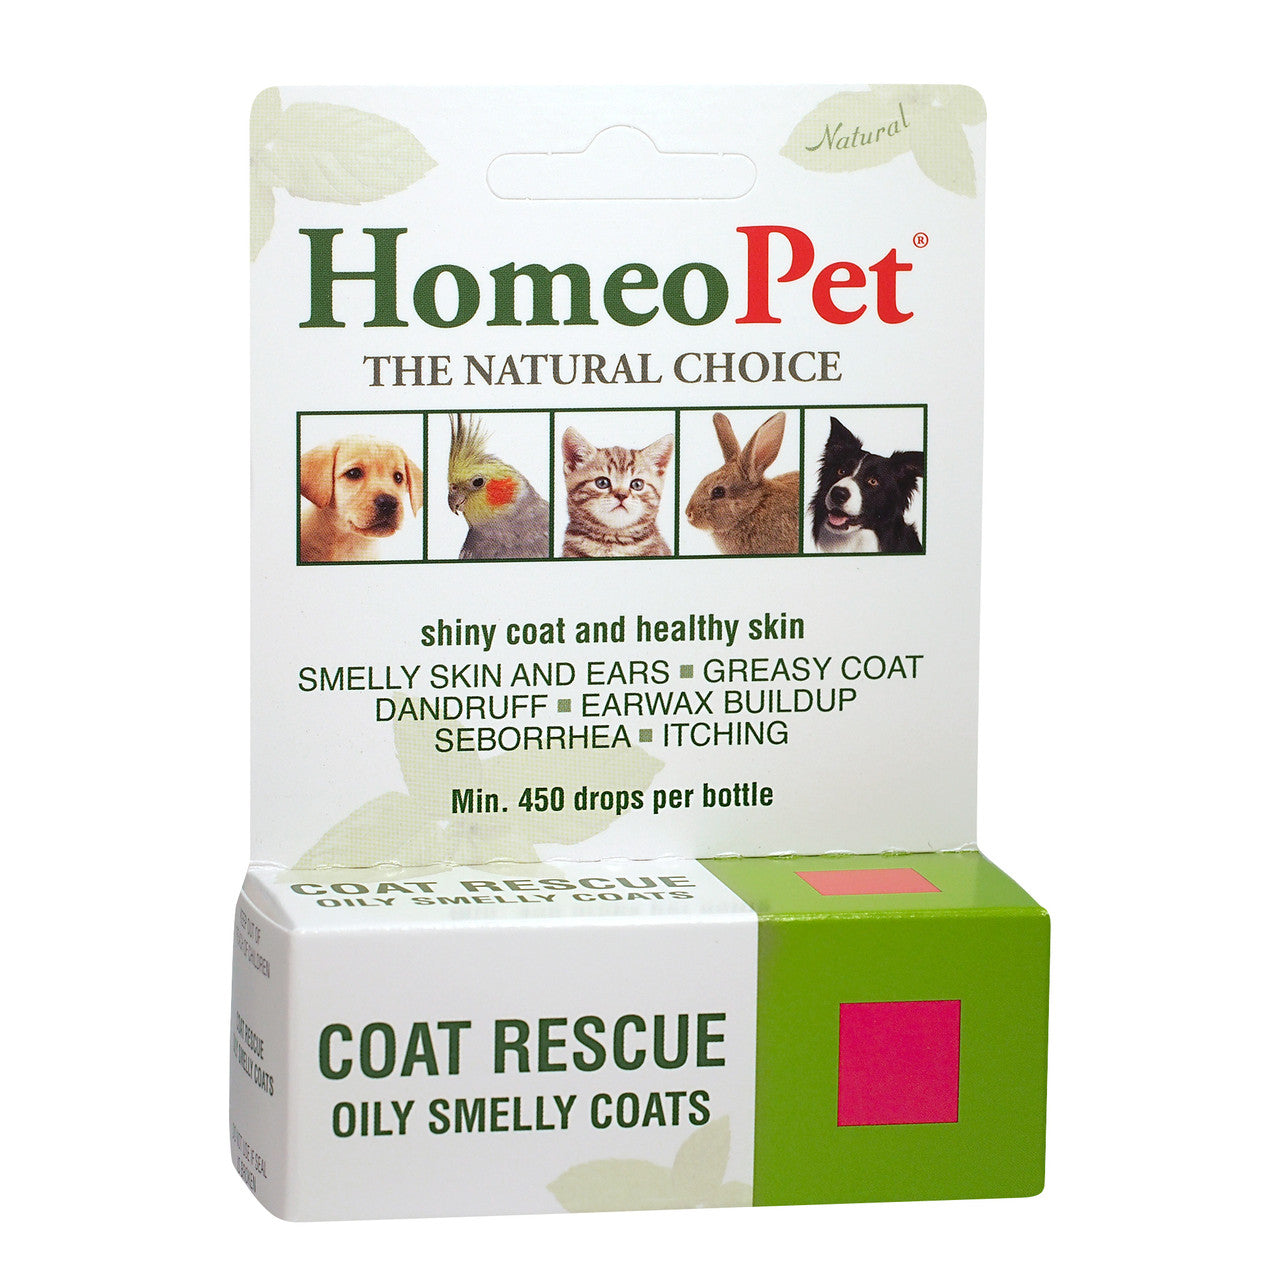 HomeoPet Coat Rescue Oily Smelly Coats 15 ml